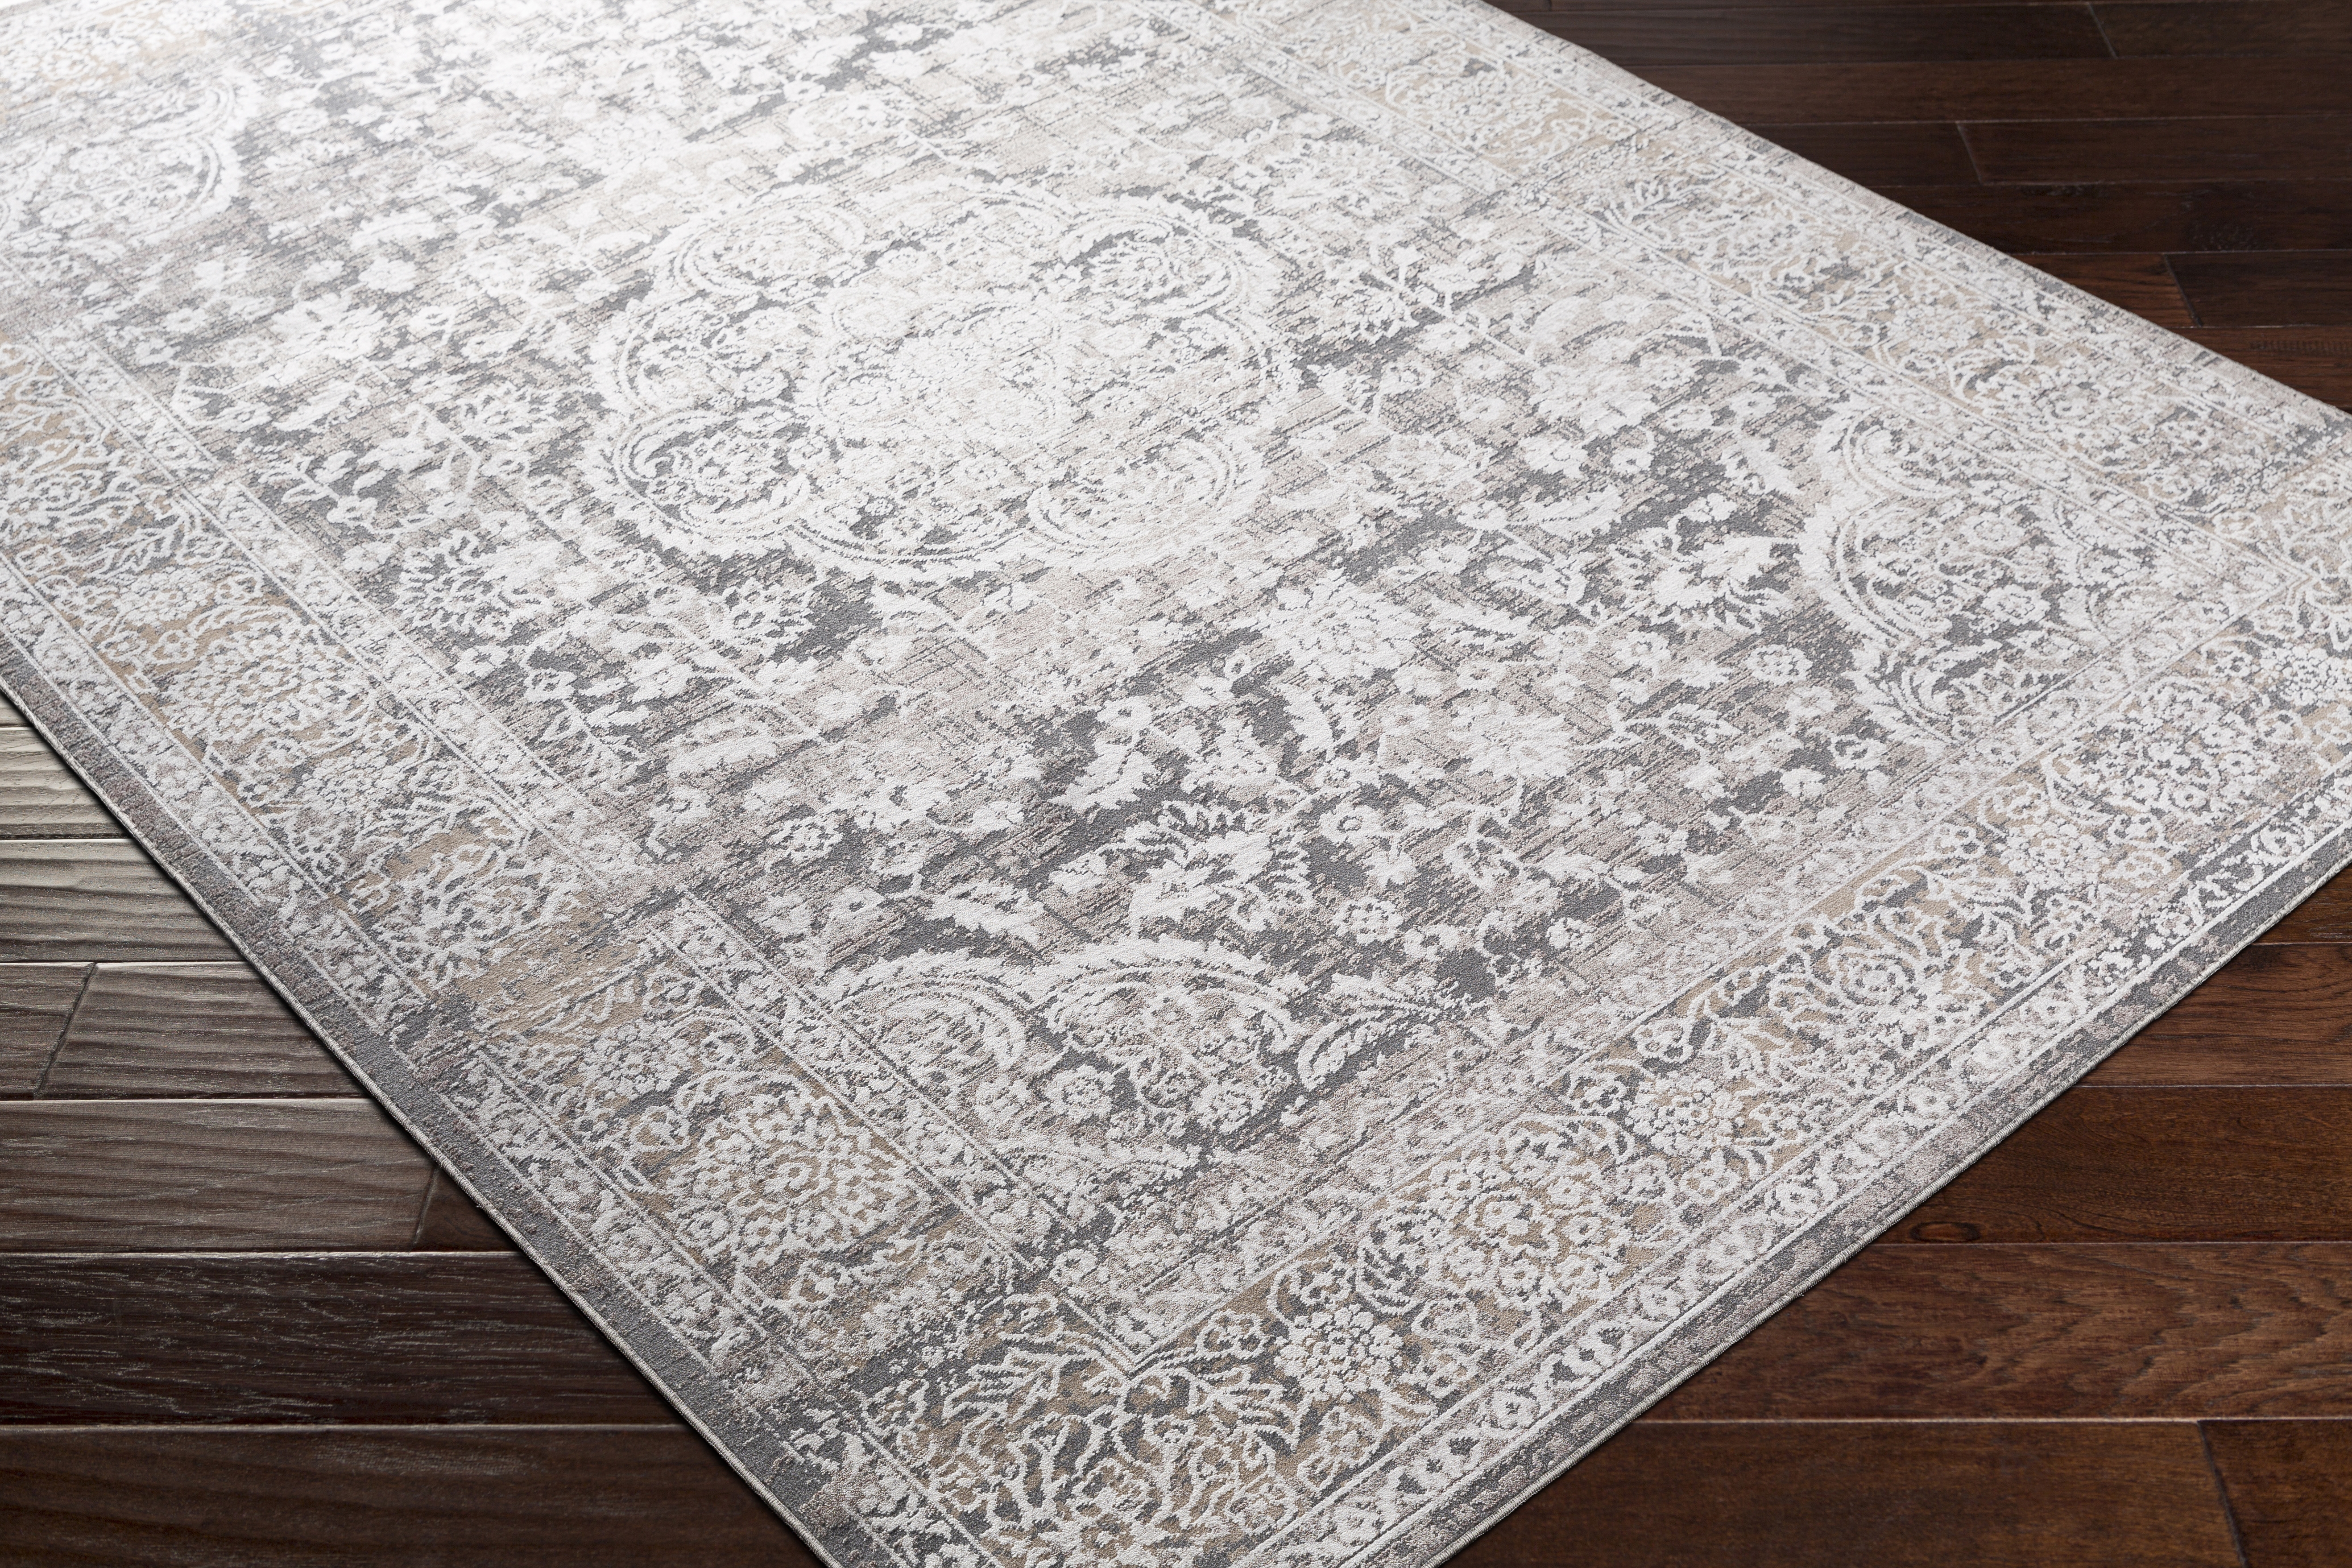 Couture Rug, 6'7" x 9'6" - Image 2